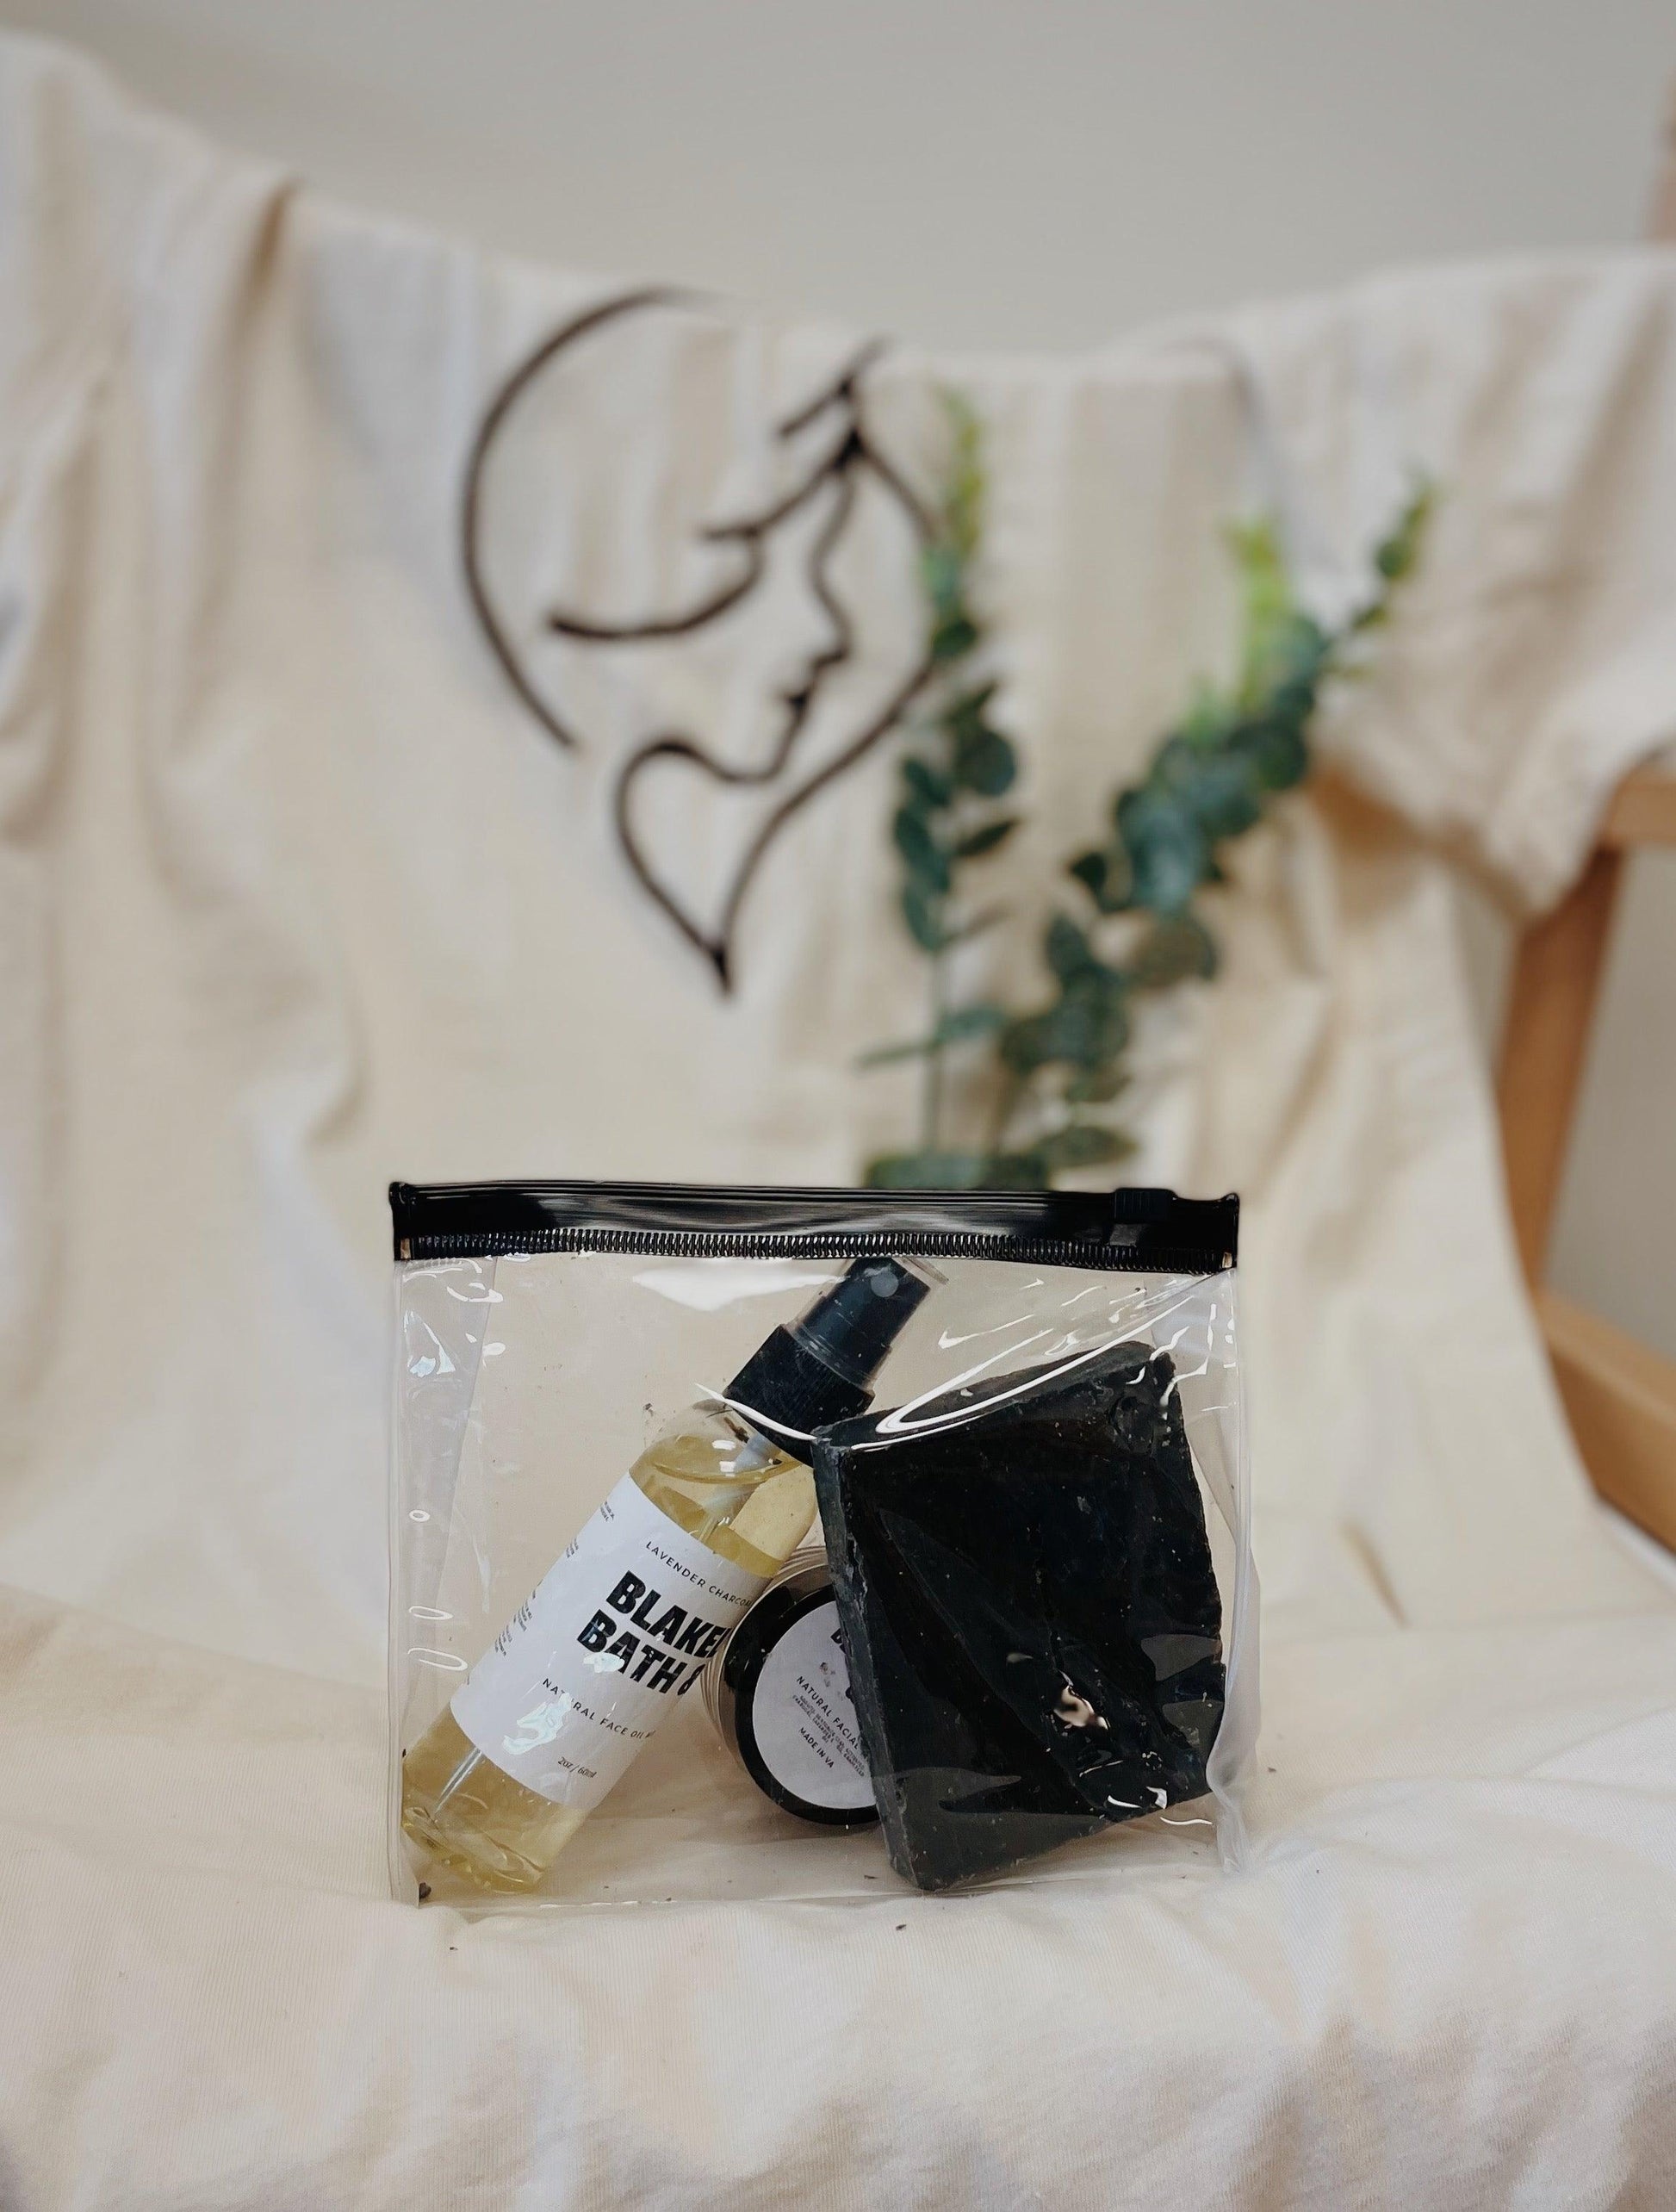 Image of the Acne kit with three small products: Natural Face Oil Moisturizer, Natural Facial Mask, and the Lavender Charcoal Soap Bar